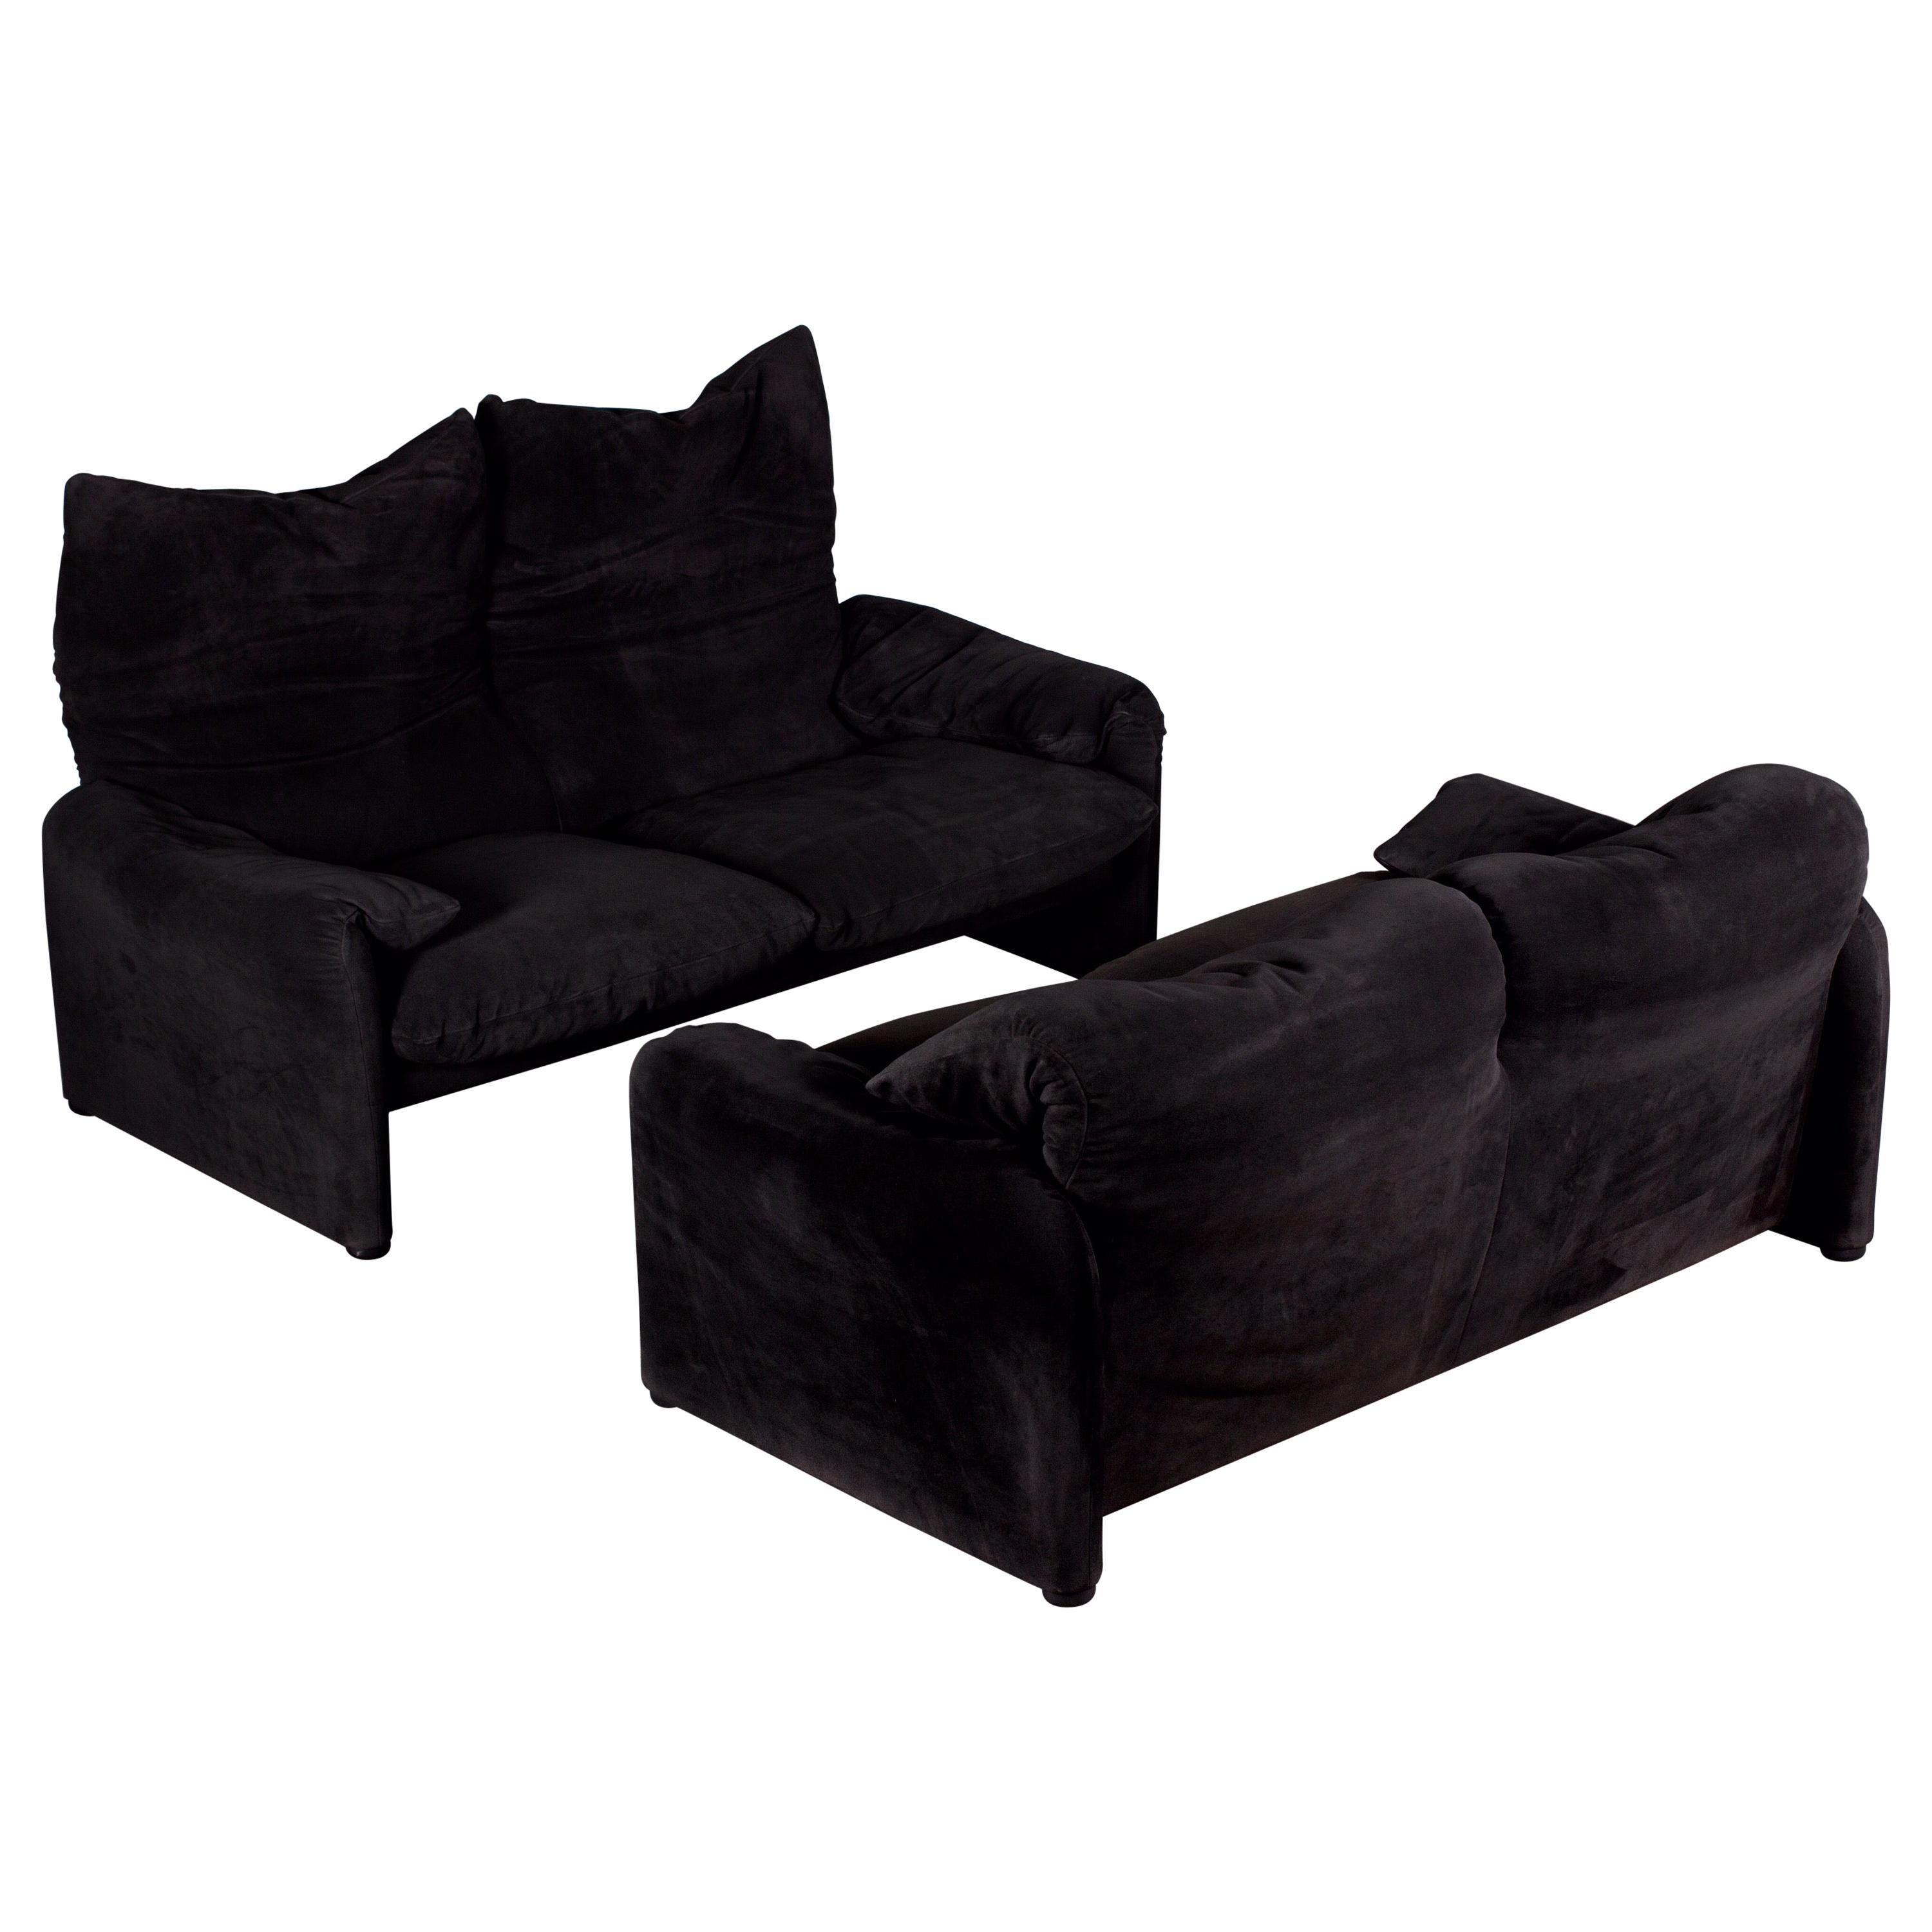 Pair of Black Suede 2-Seater Maralunga Sofas by Vico Magistretti for Cassina